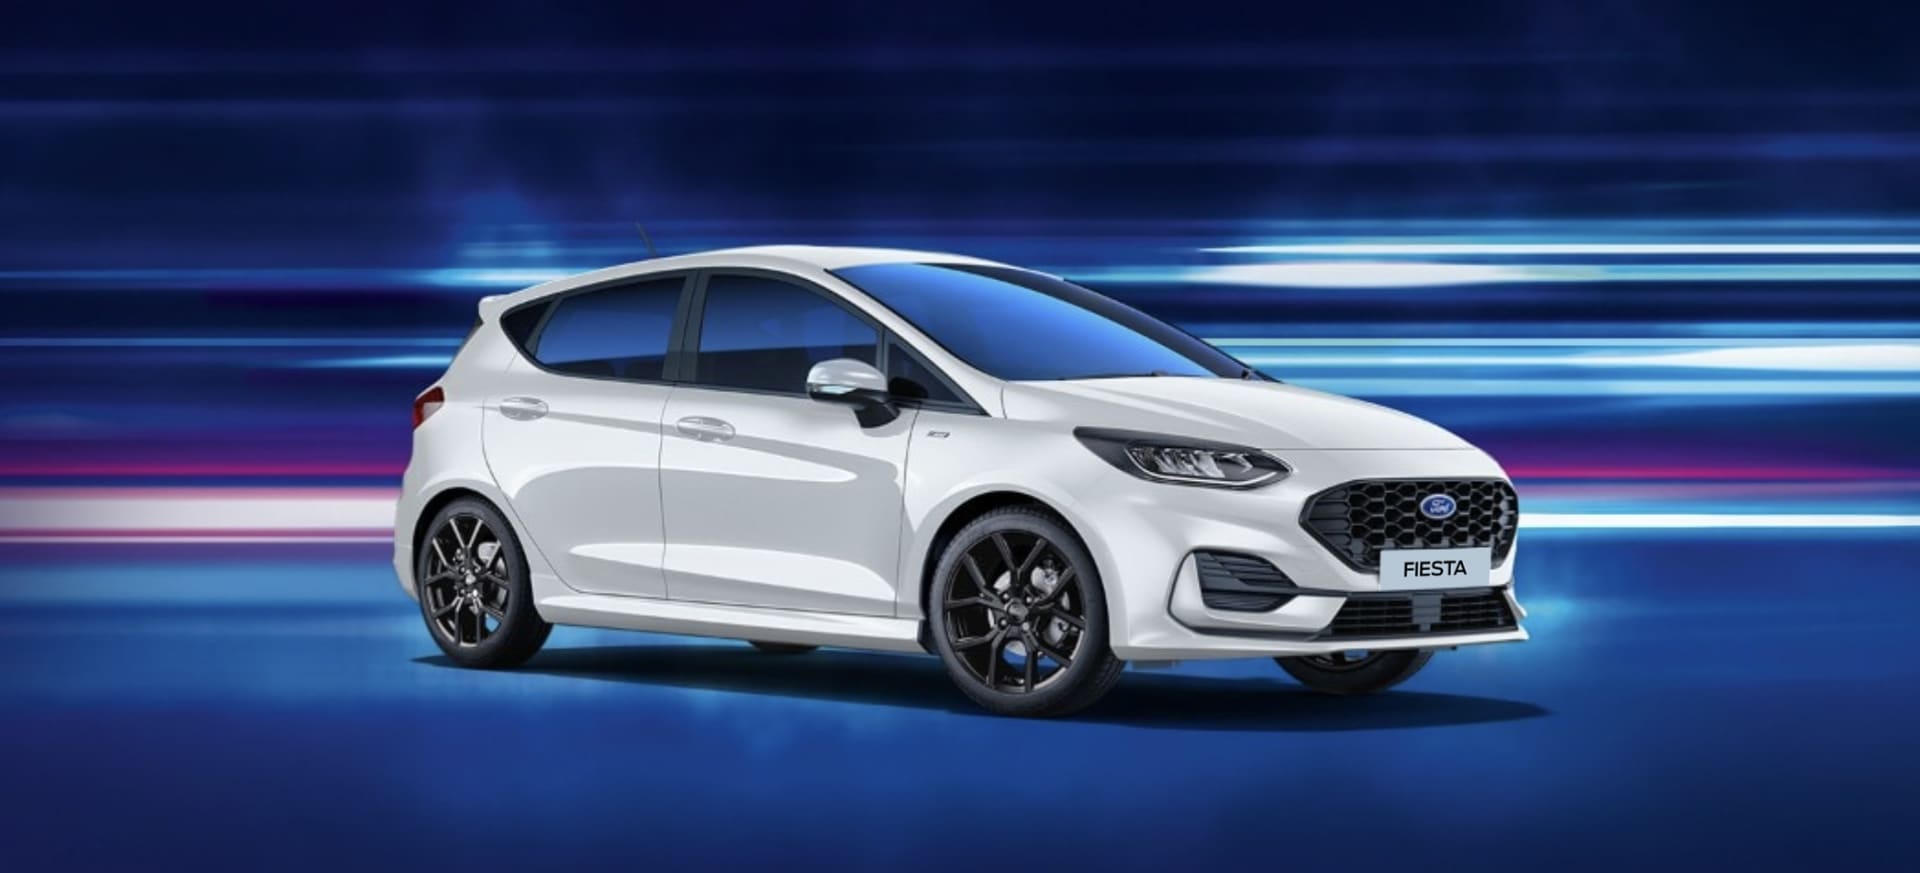 Park's Ford - Last Chance to Buy a Brand New Fiesta